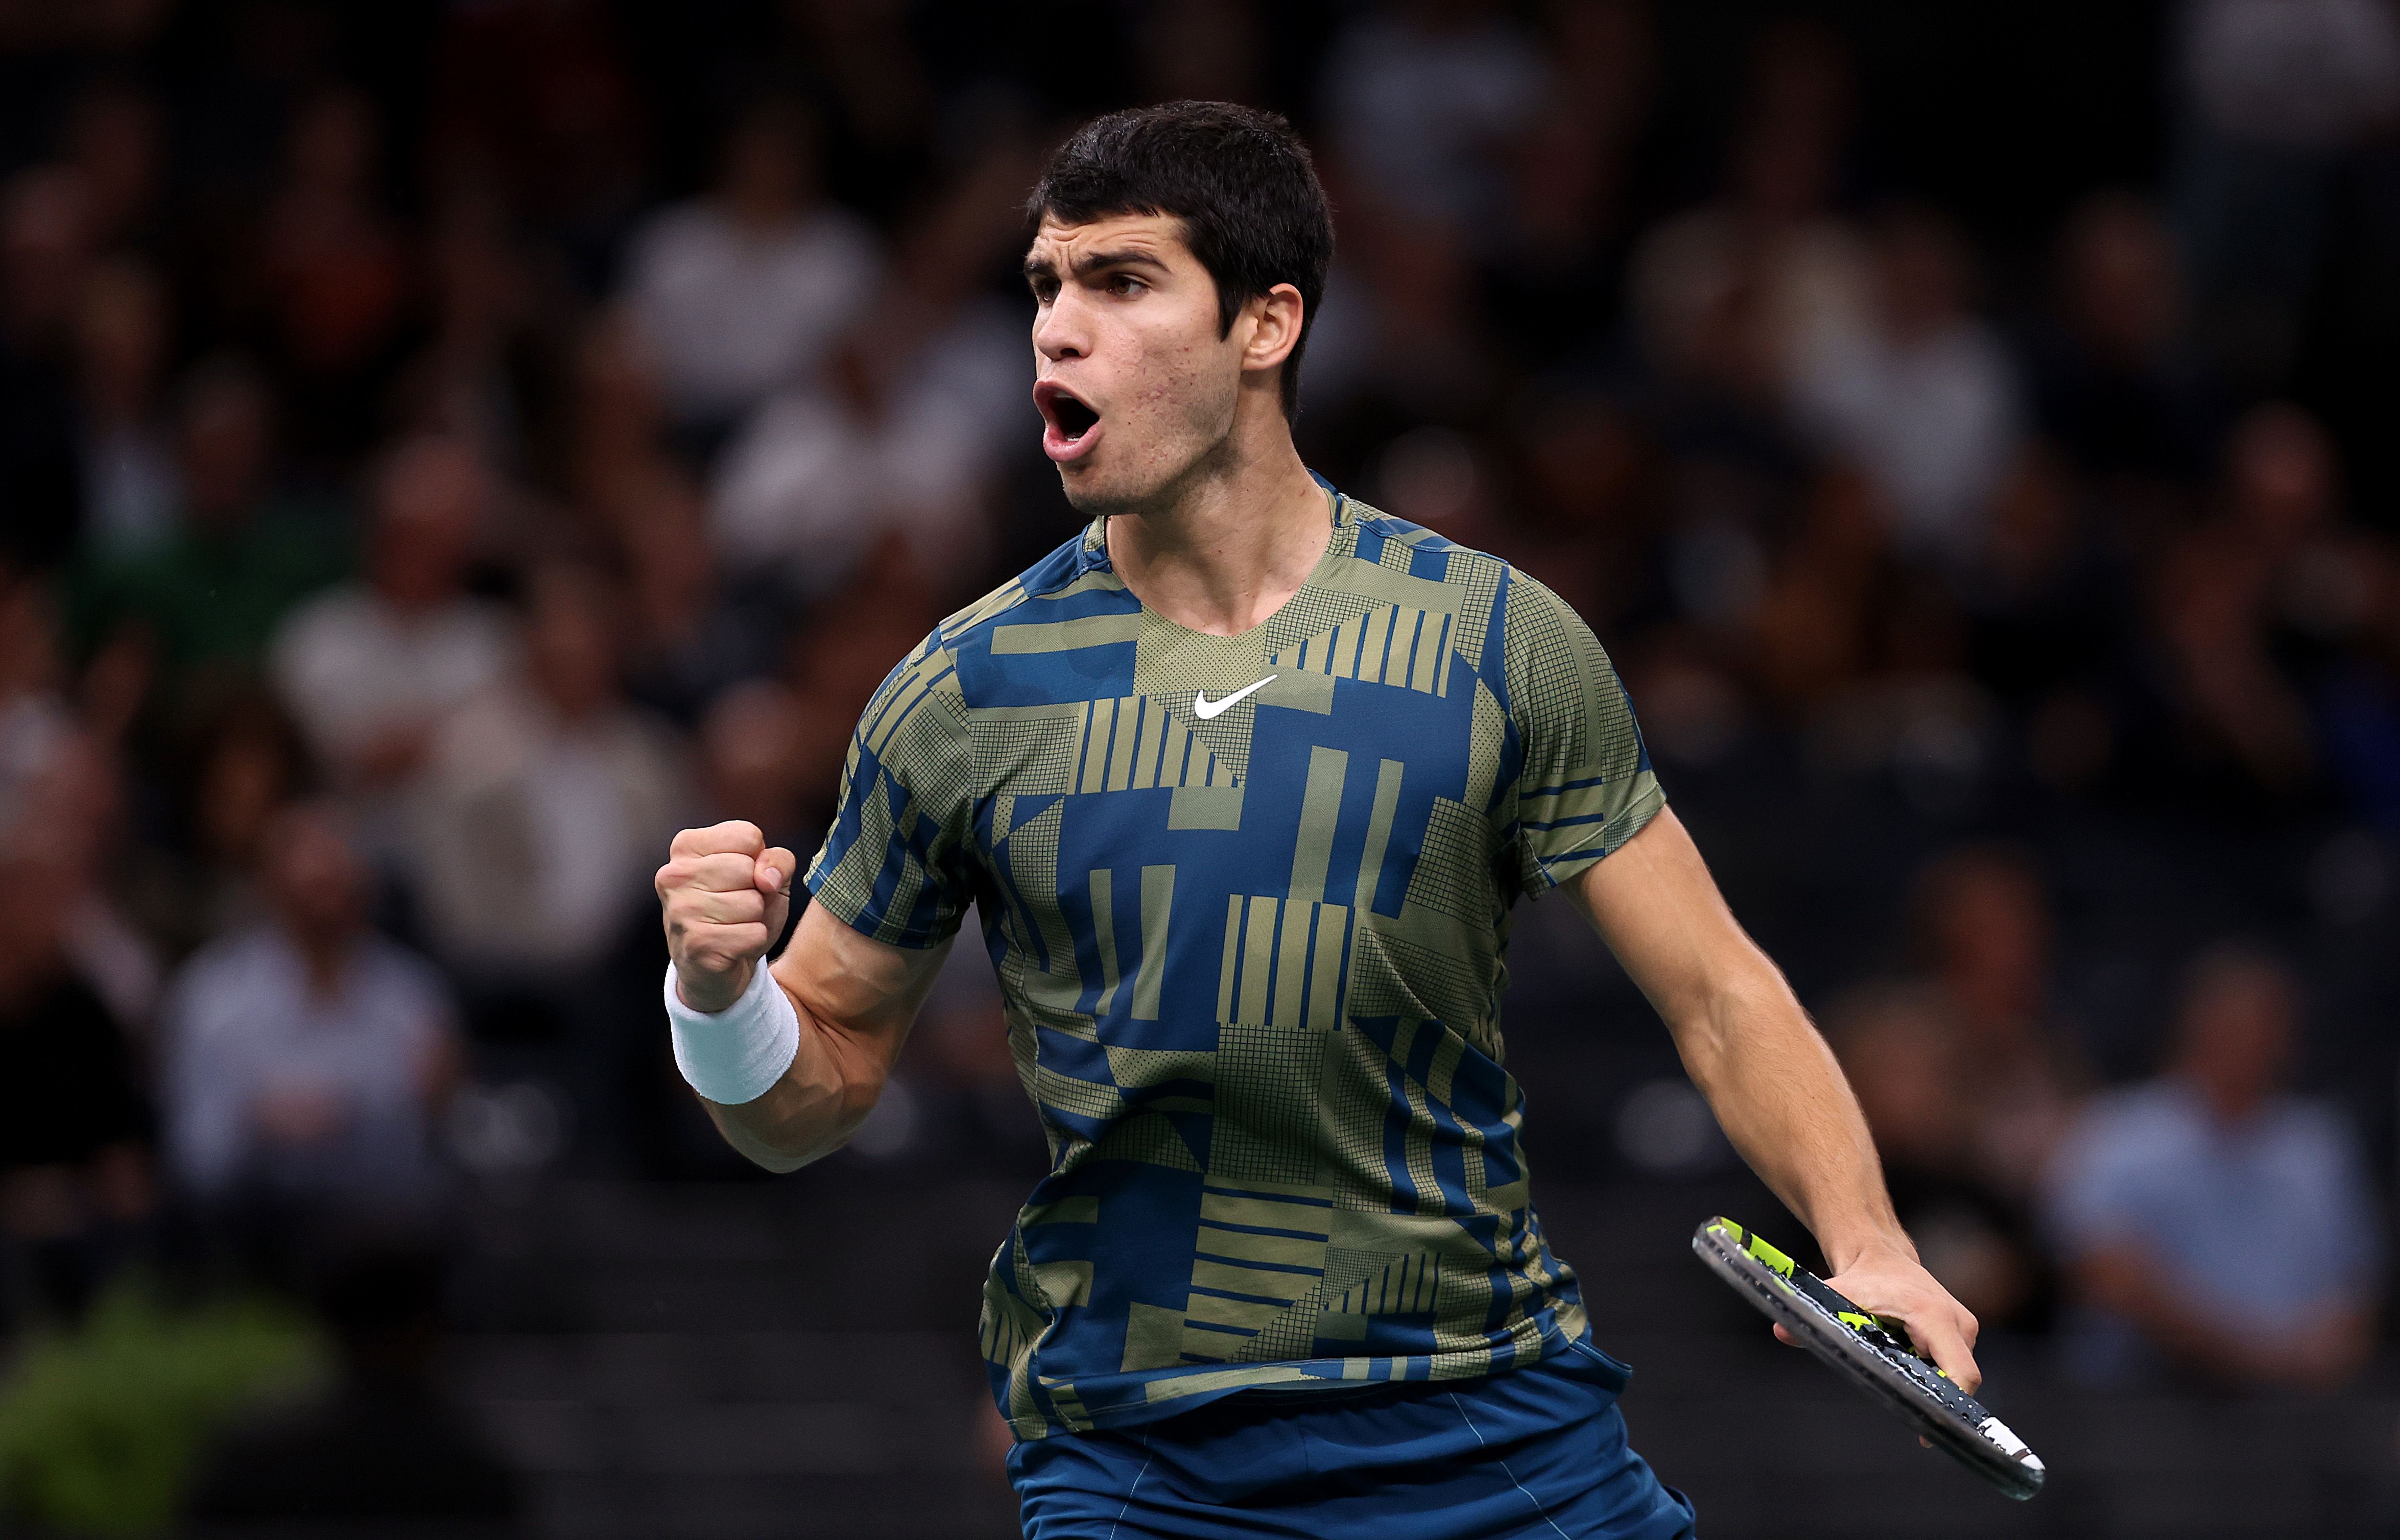 Who is the world No.1 in men's tennis? Updated ATP rankings and